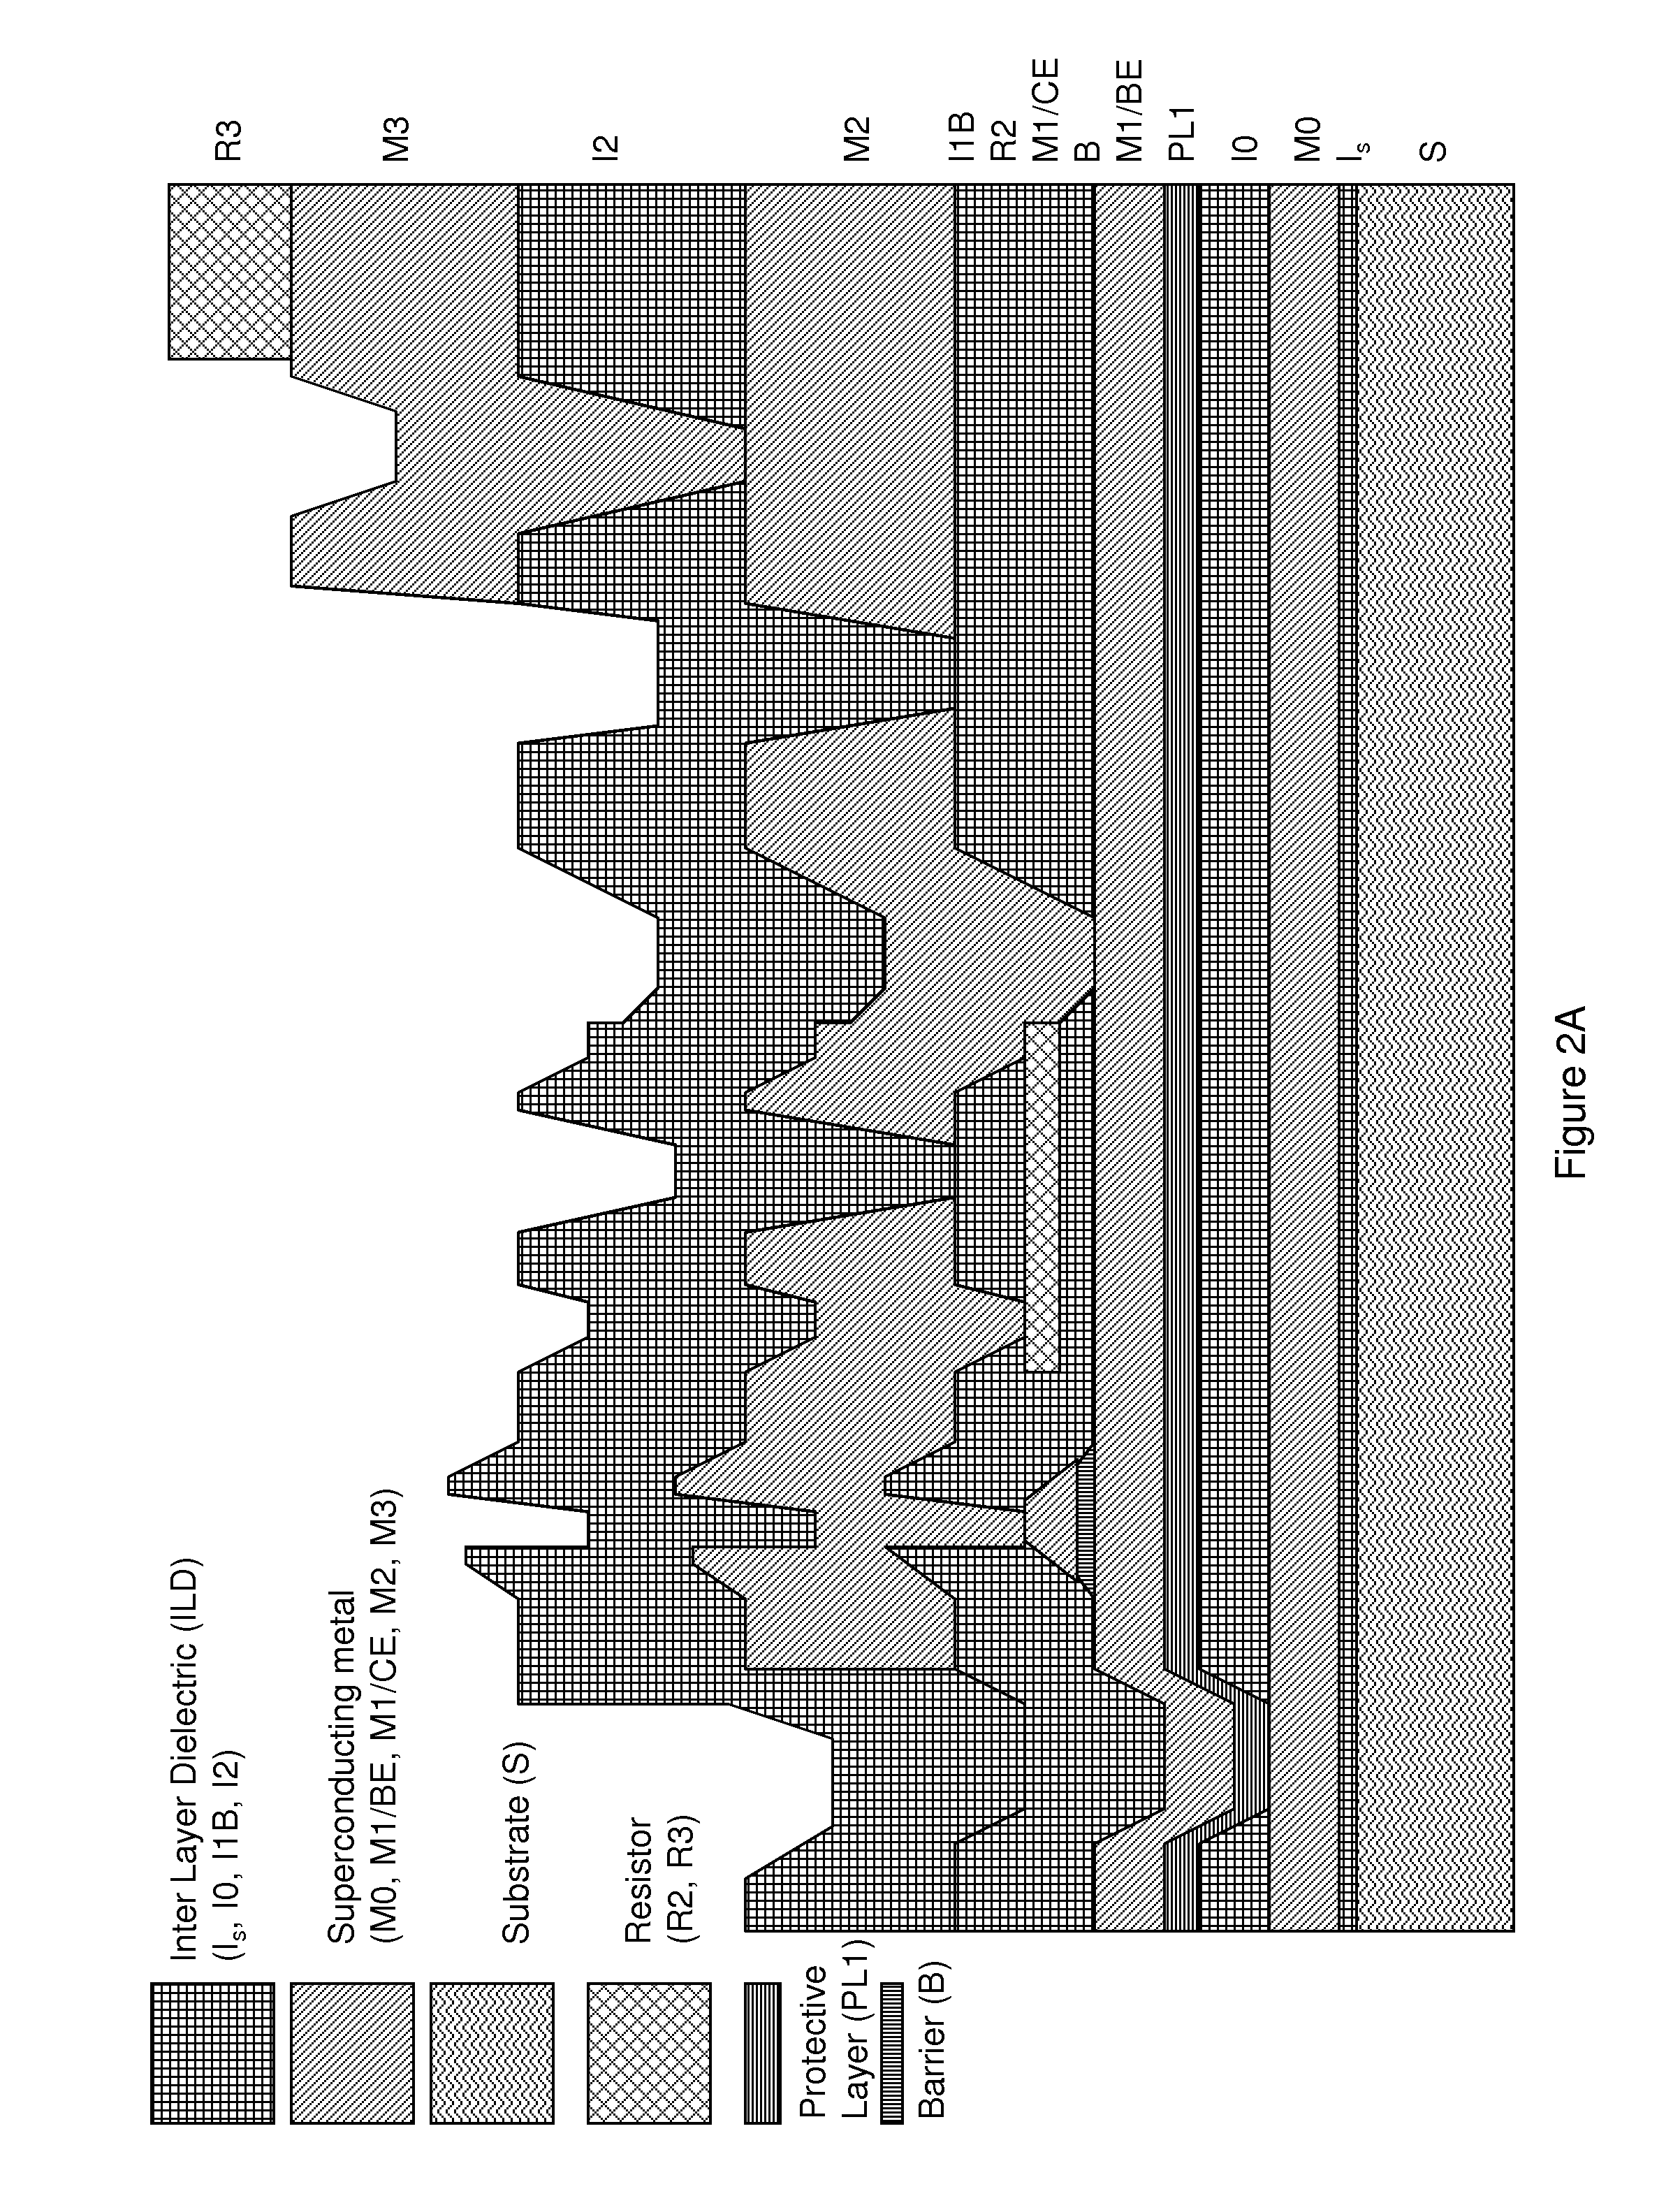 System and method for providing multi-conductive layer metallic interconnects for superconducting integrated circuits